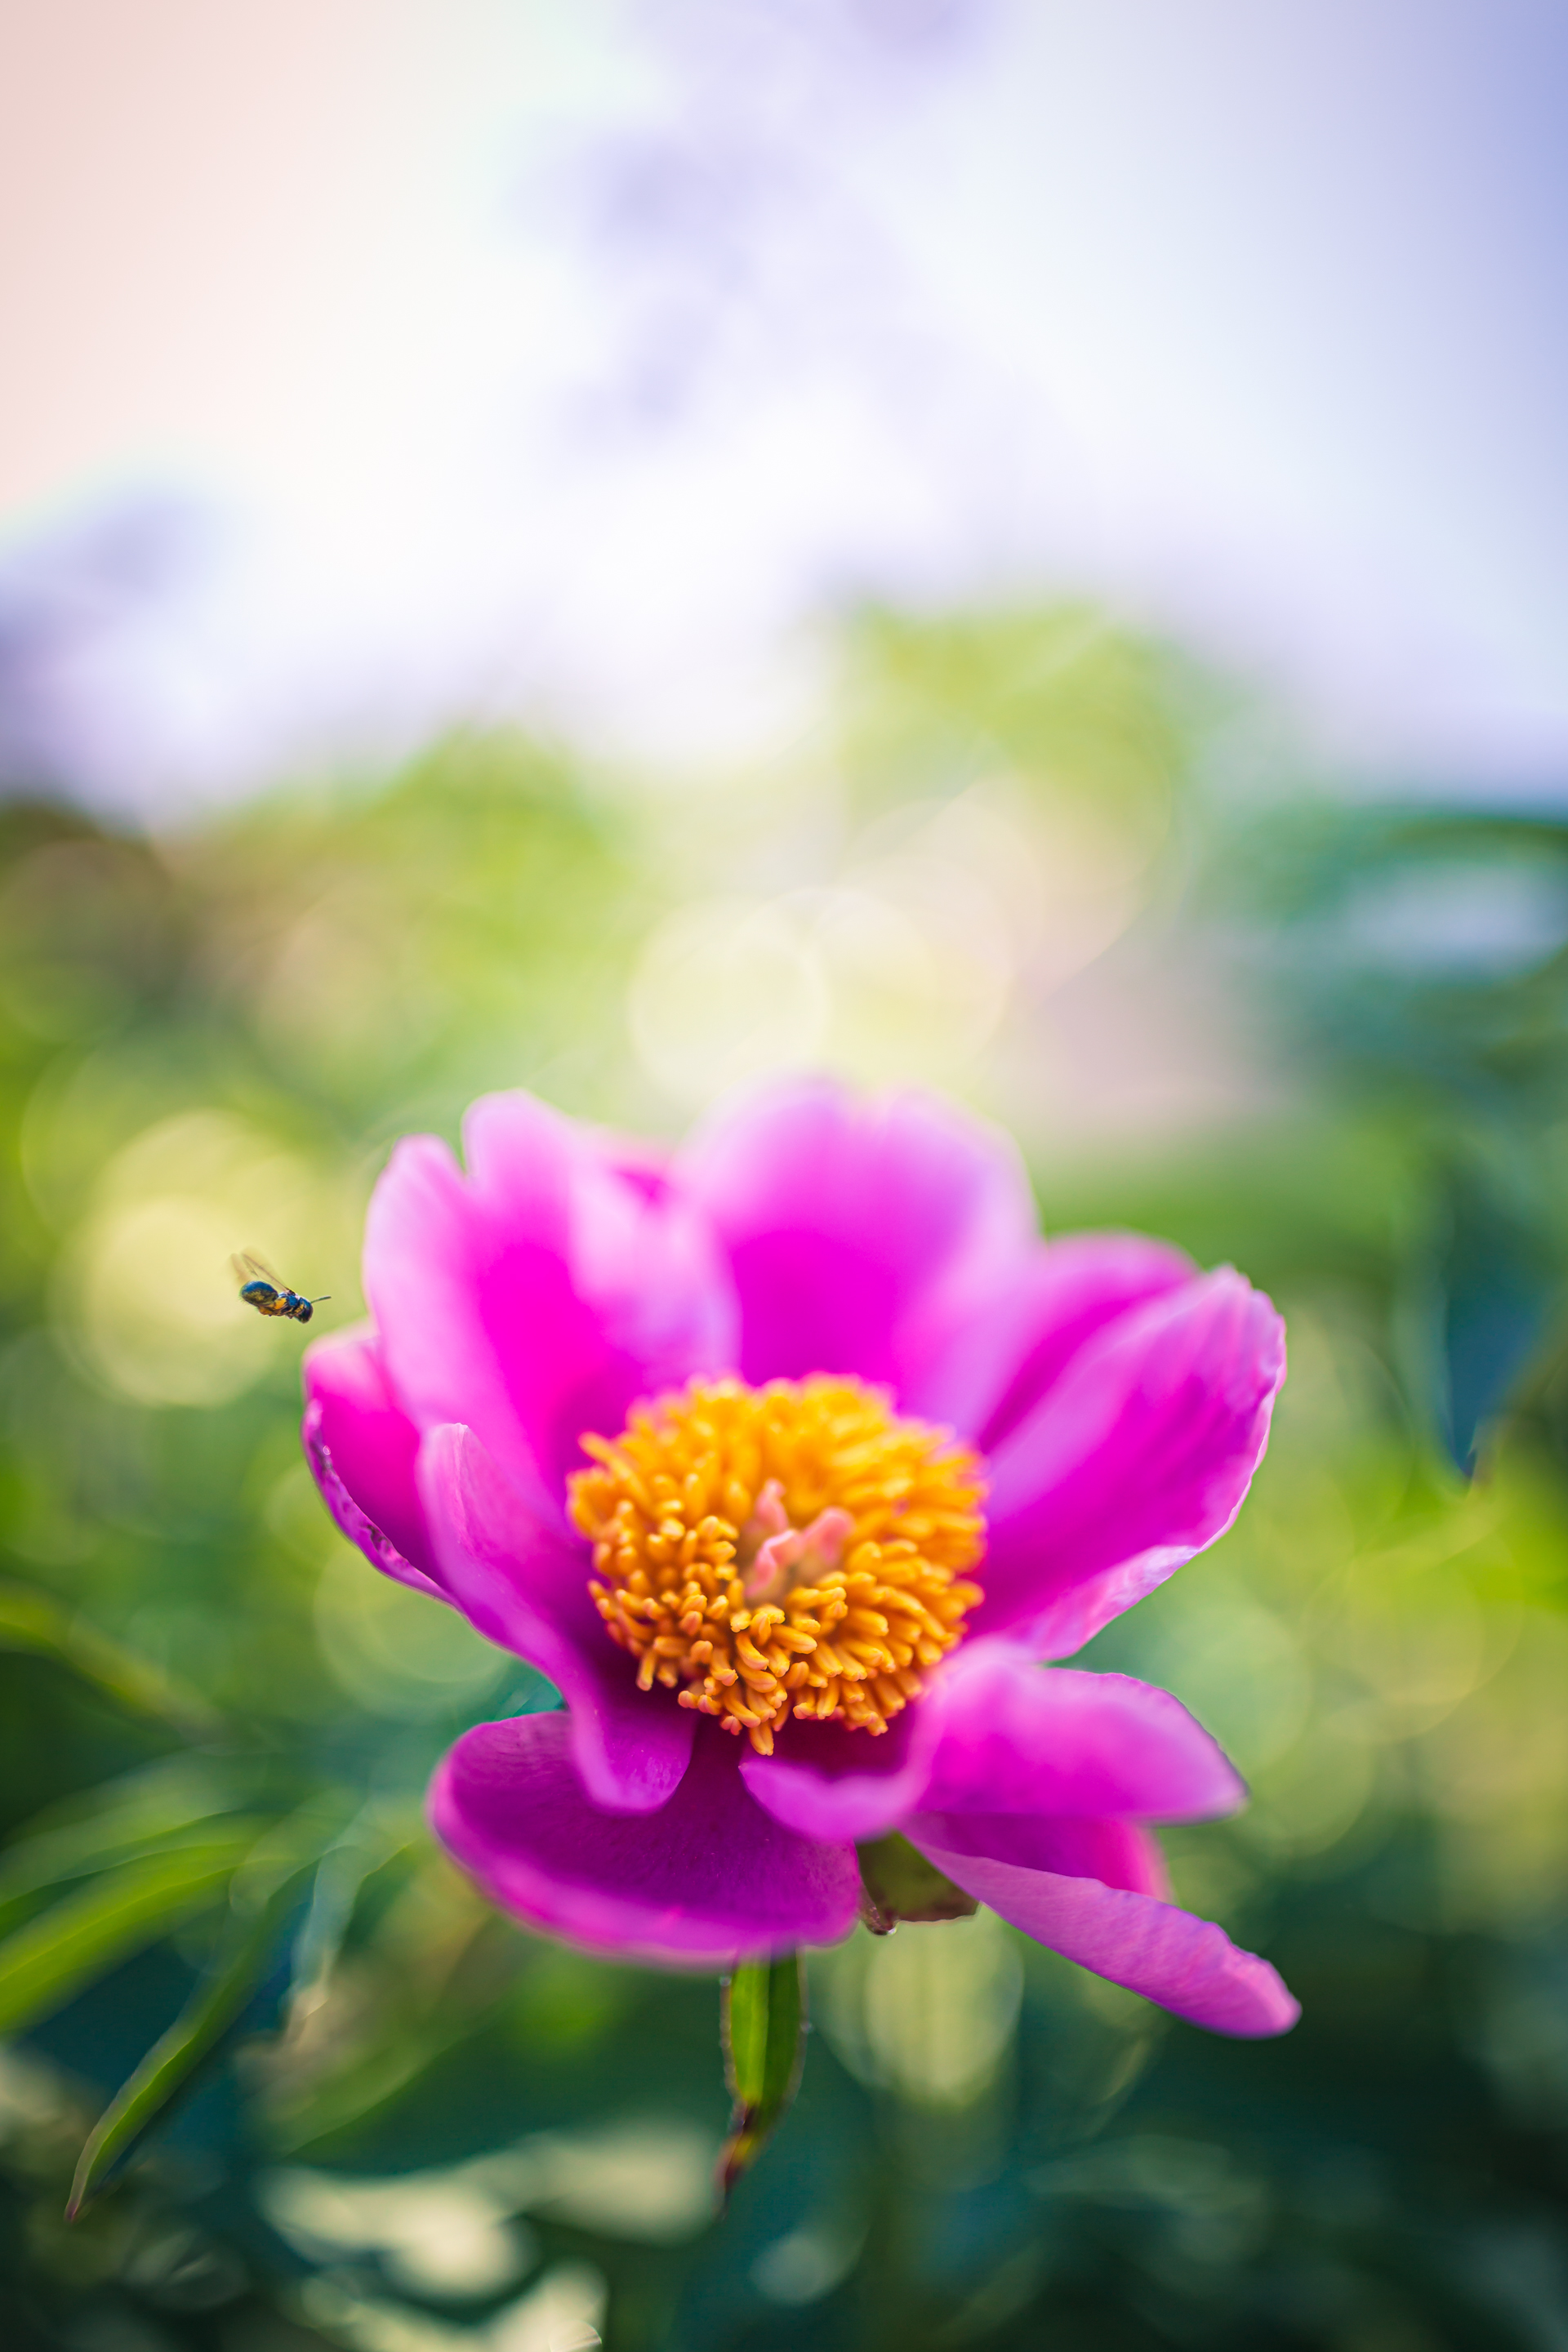 35mm portrait orientation photo of a single bright pink peony blossom. Shallow depth of field and smooth bokeh frame out a pollinating insect flying to the flower.